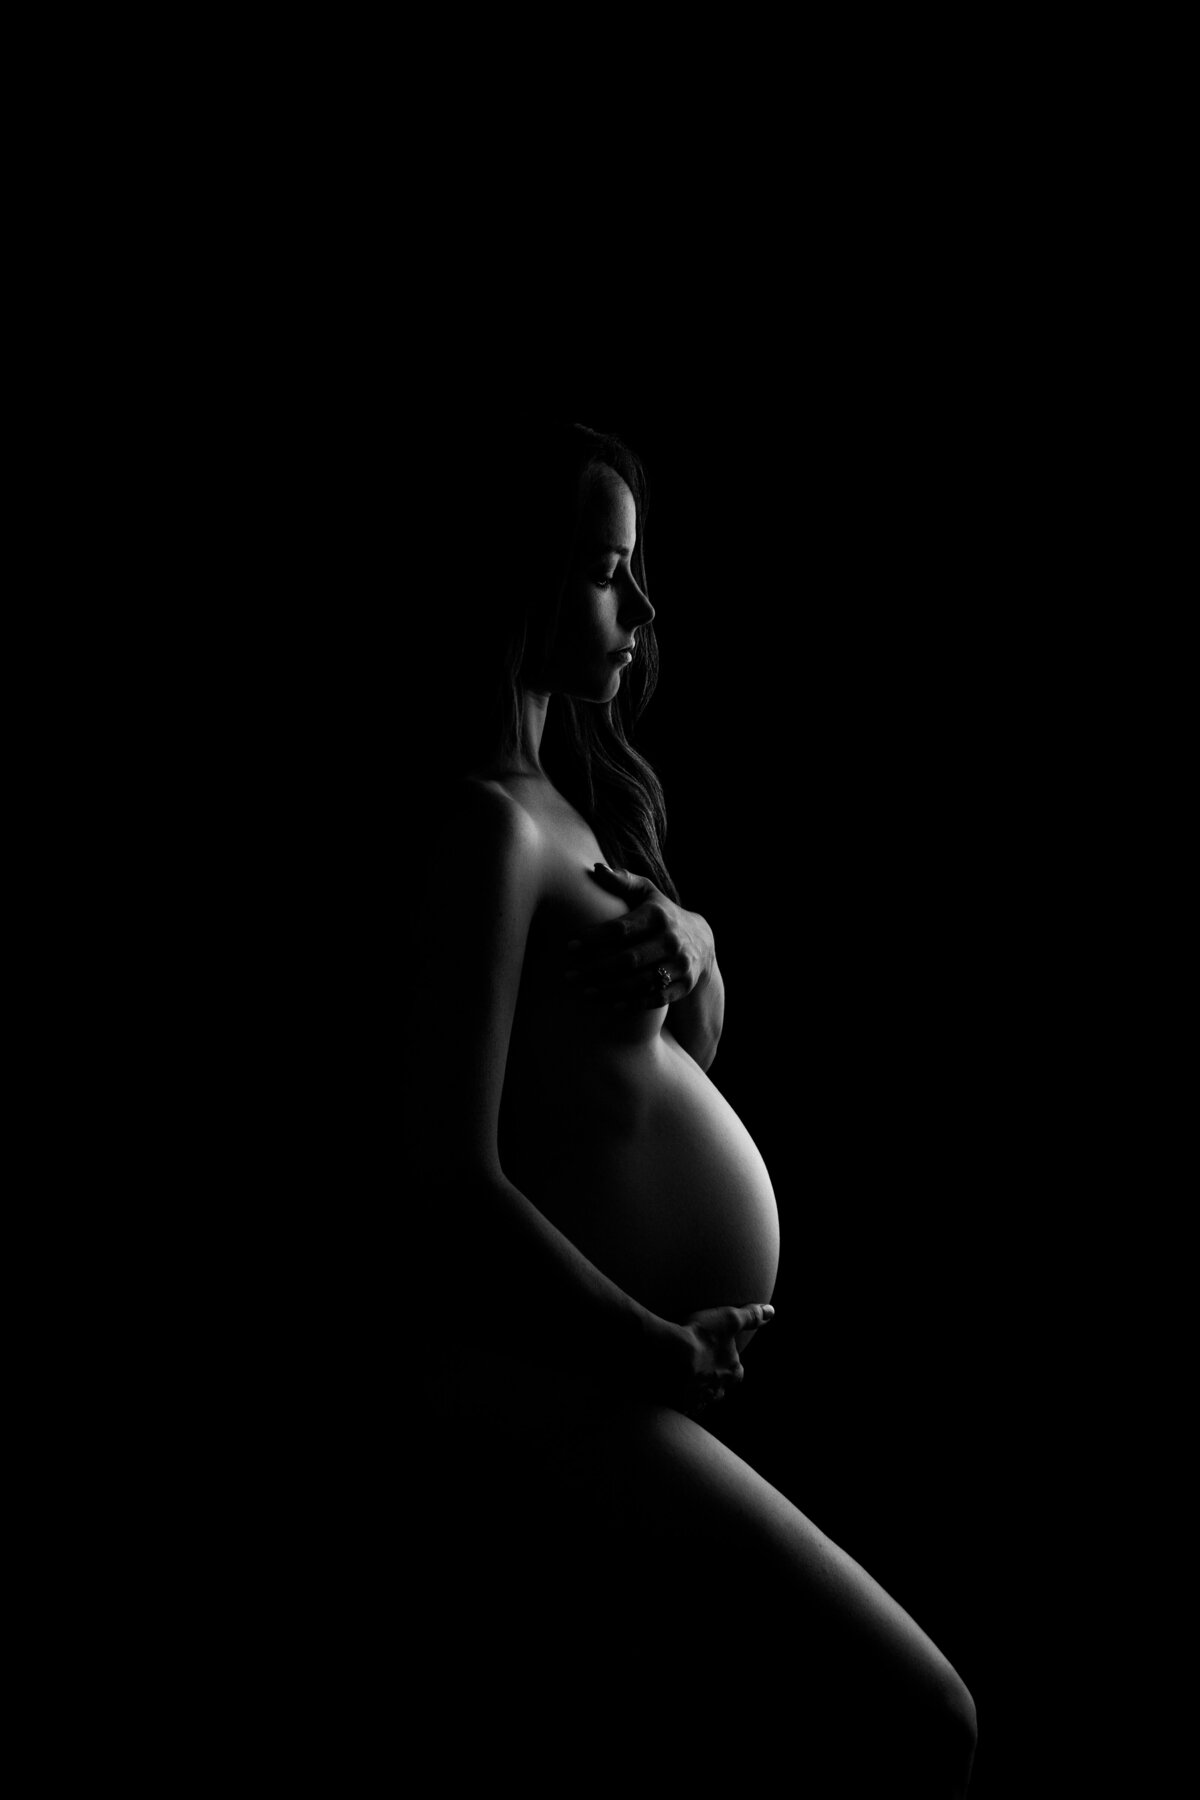 Philadelphia's premier maternity photographer, Katie Marshall, skillfully captures the drama and elegance of maternity in this striking black and white photograph. The expectant mother stands bare in side profile against a dark, dramatic backdrop.  With minimalist attire, she confidently showcases her pregnancy, her face in serene side profile. Soft light from the right gently caresses her form, creating subtle shadows that emphasize the contours of her body.  This captivating image artfully portrays the beauty and strength of maternity, evoking a sense of timeless grace and intrigue.